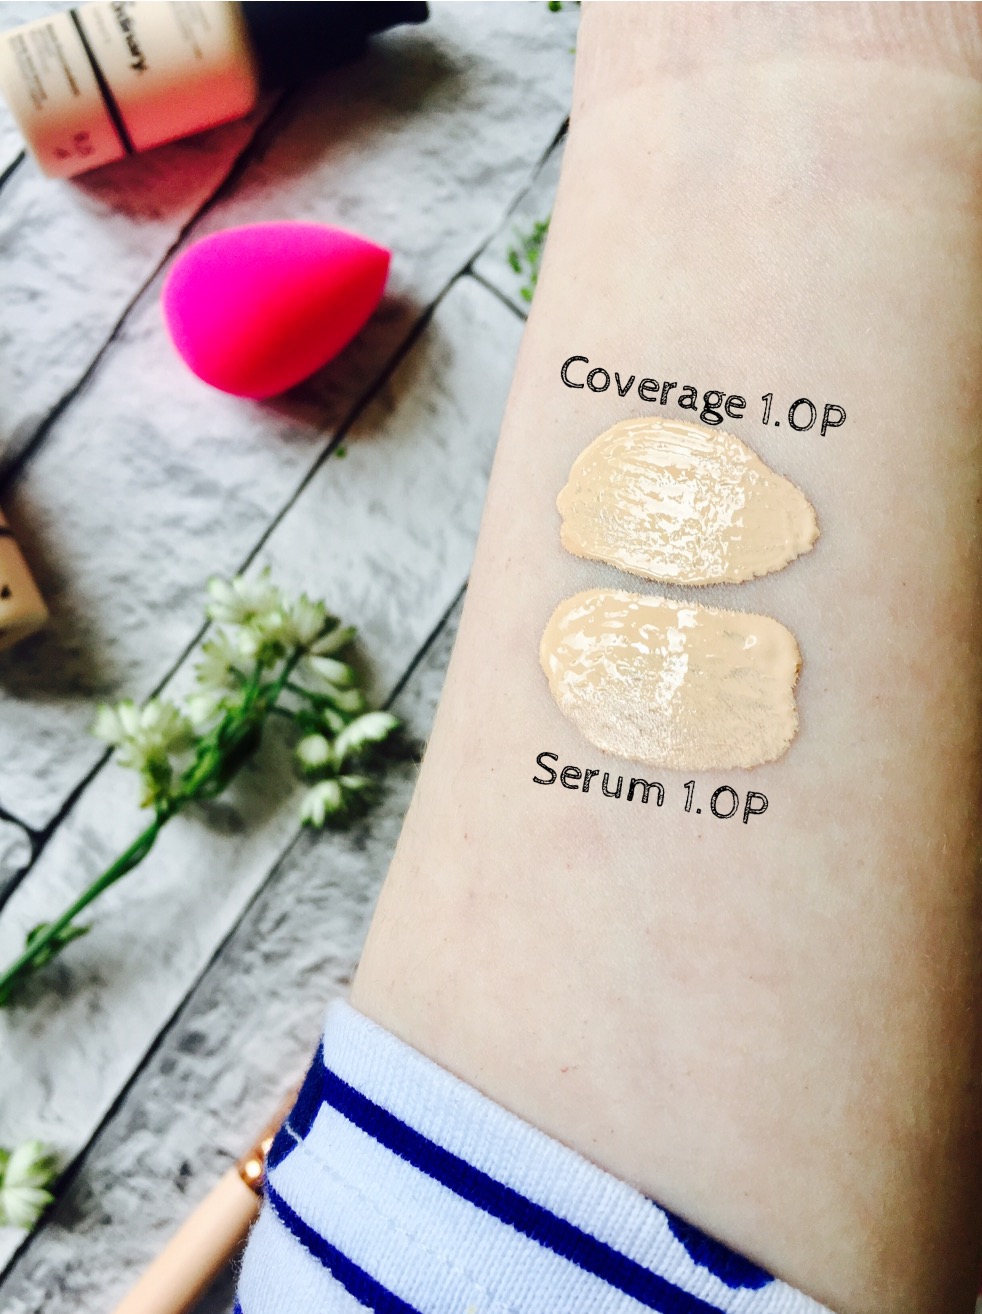 The Ordinary Serum Coverages foundation review pale skin 1.0P swatches